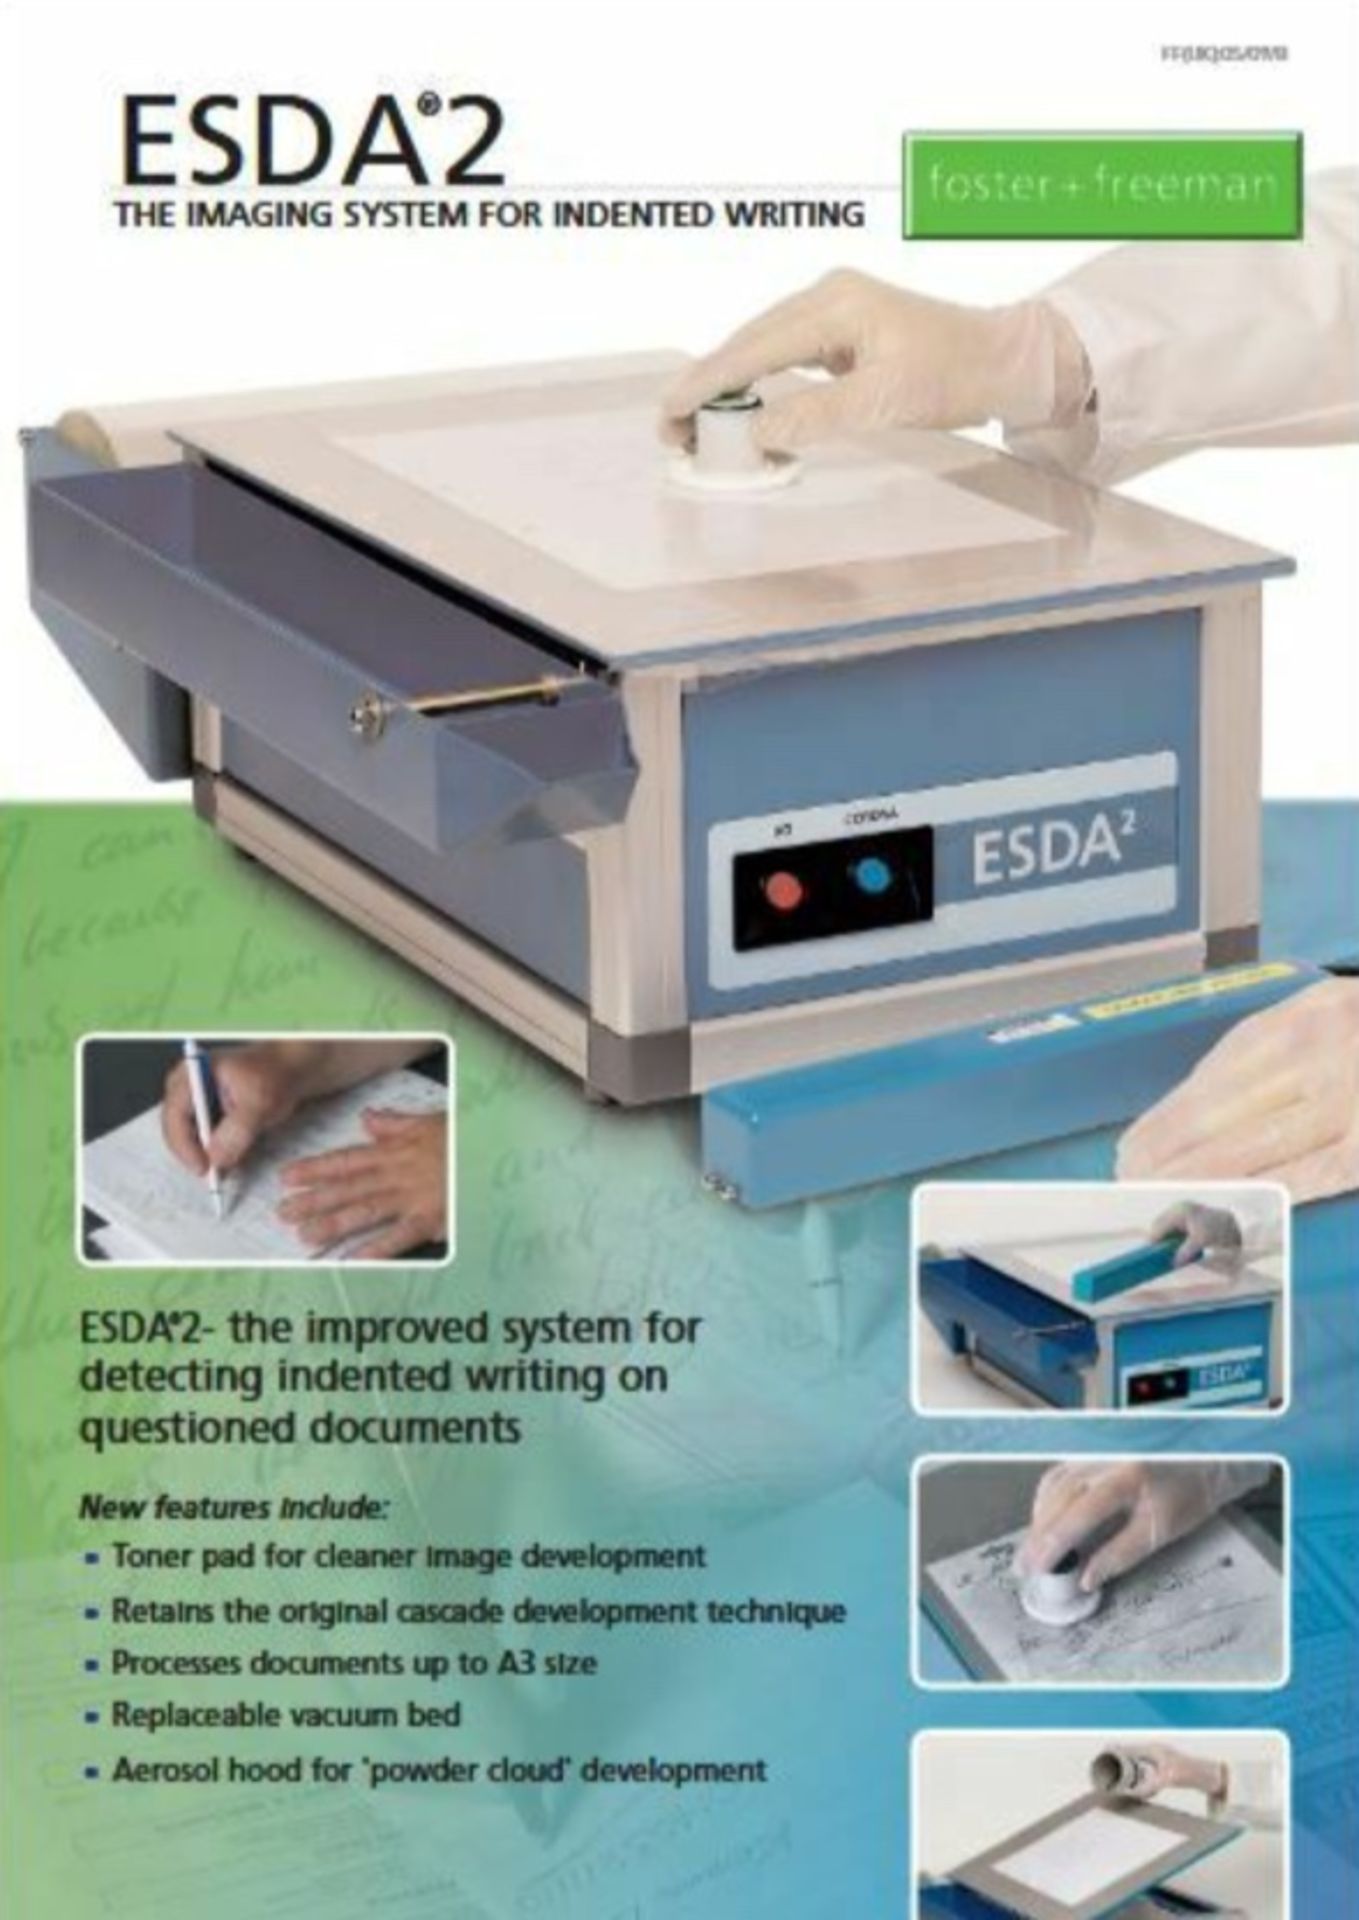 Foster + Freeman EDSA2 Forsensic Document Indented Writing Analysis Device (Cost £5000 2 Months Ago) - Image 11 of 12